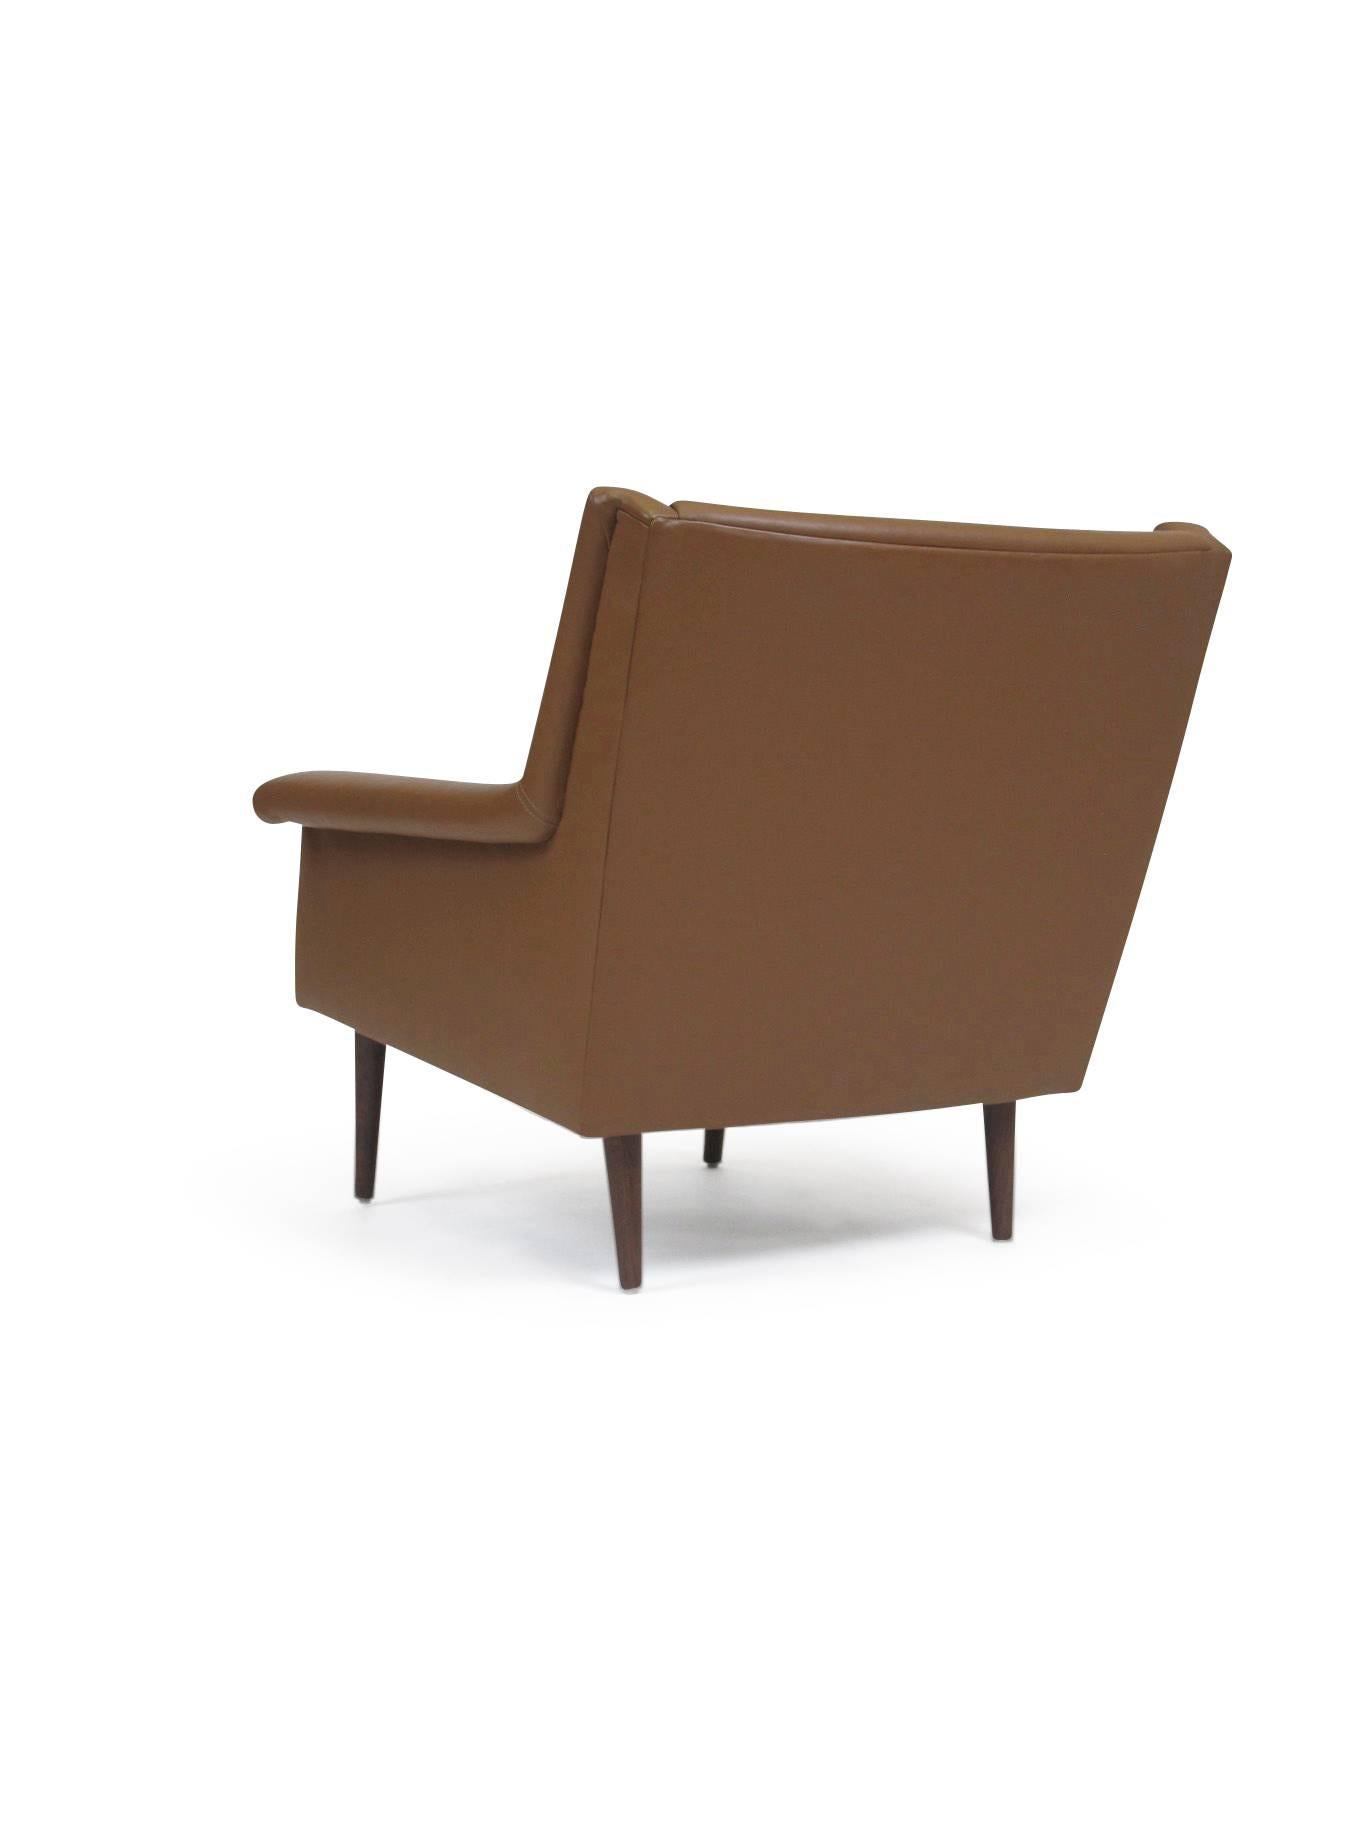 Milo Baughman for Thayer Coggin Brown Leather Lounge Chair 1